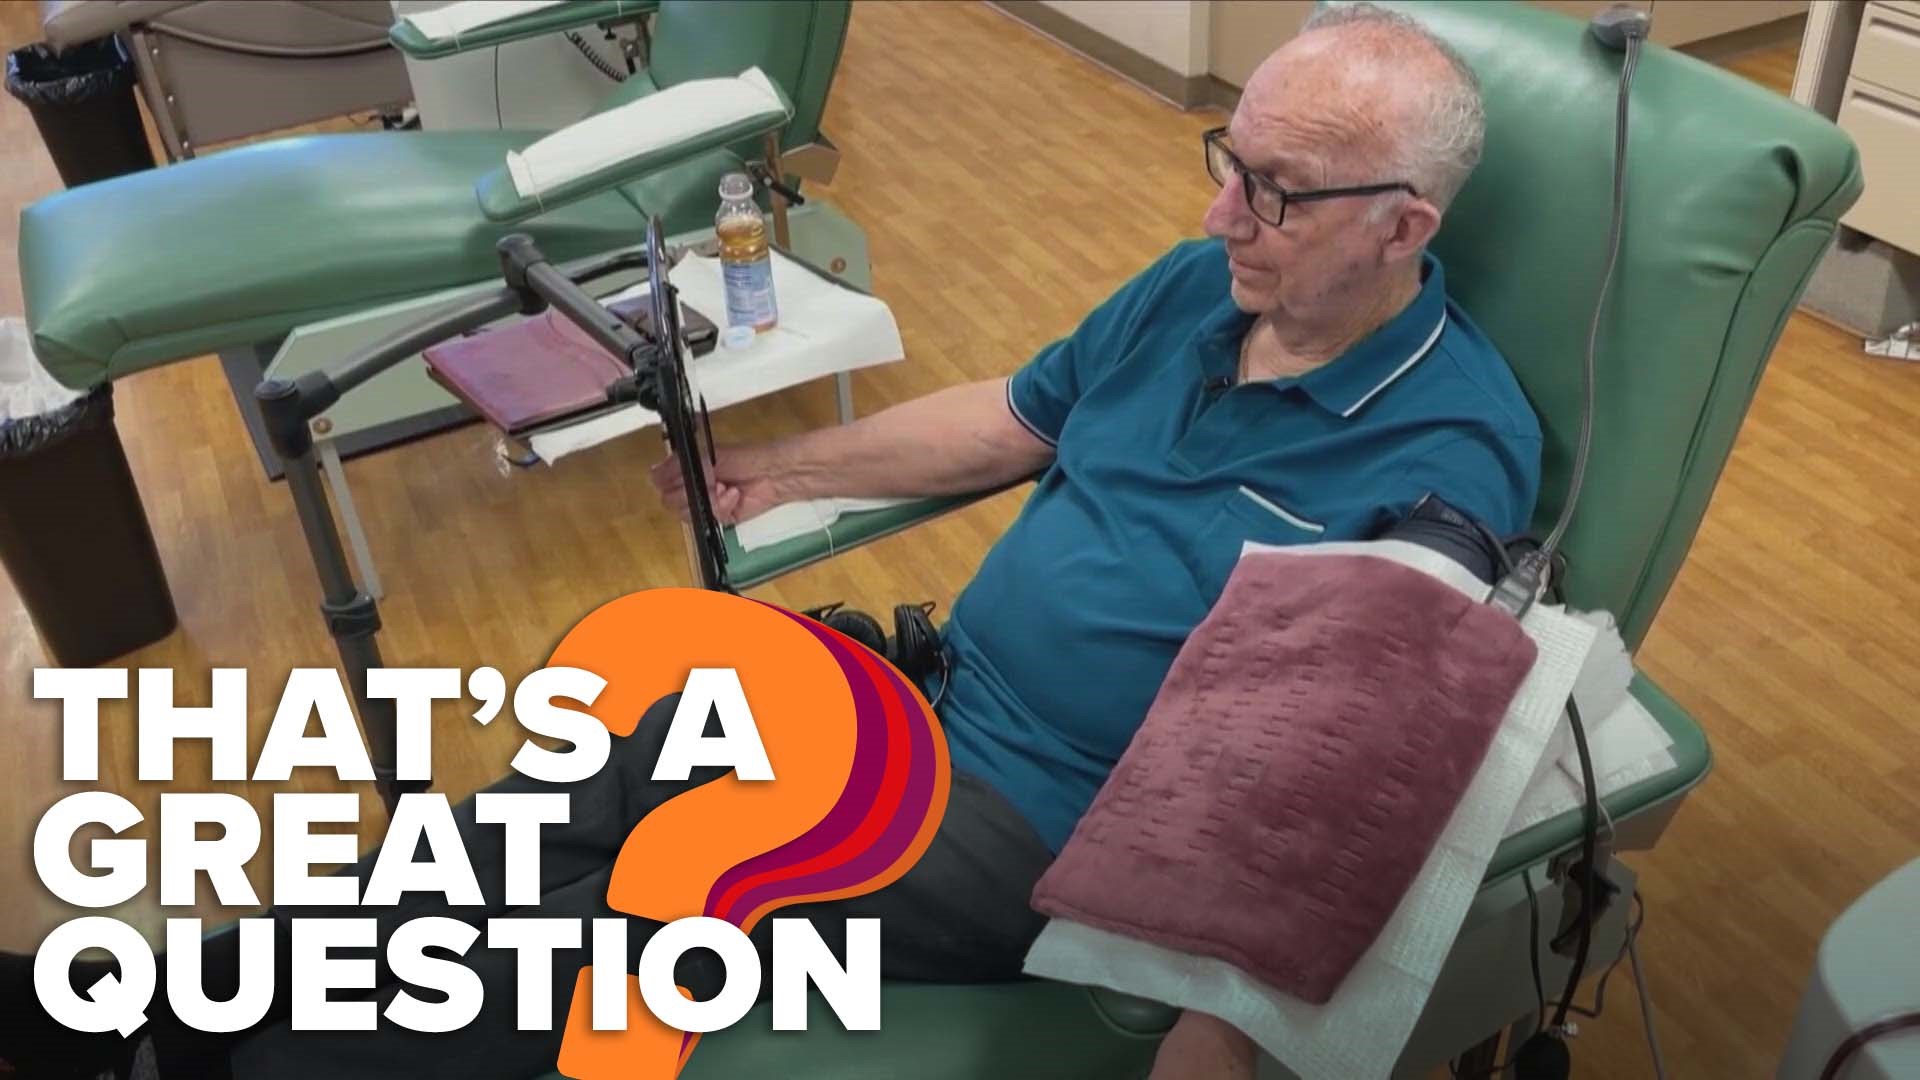 Donating blood is a simple act that can help save a life— but is there an age limit to do so? Hayden Balgavy takes a look in this week's That's A Great Question.